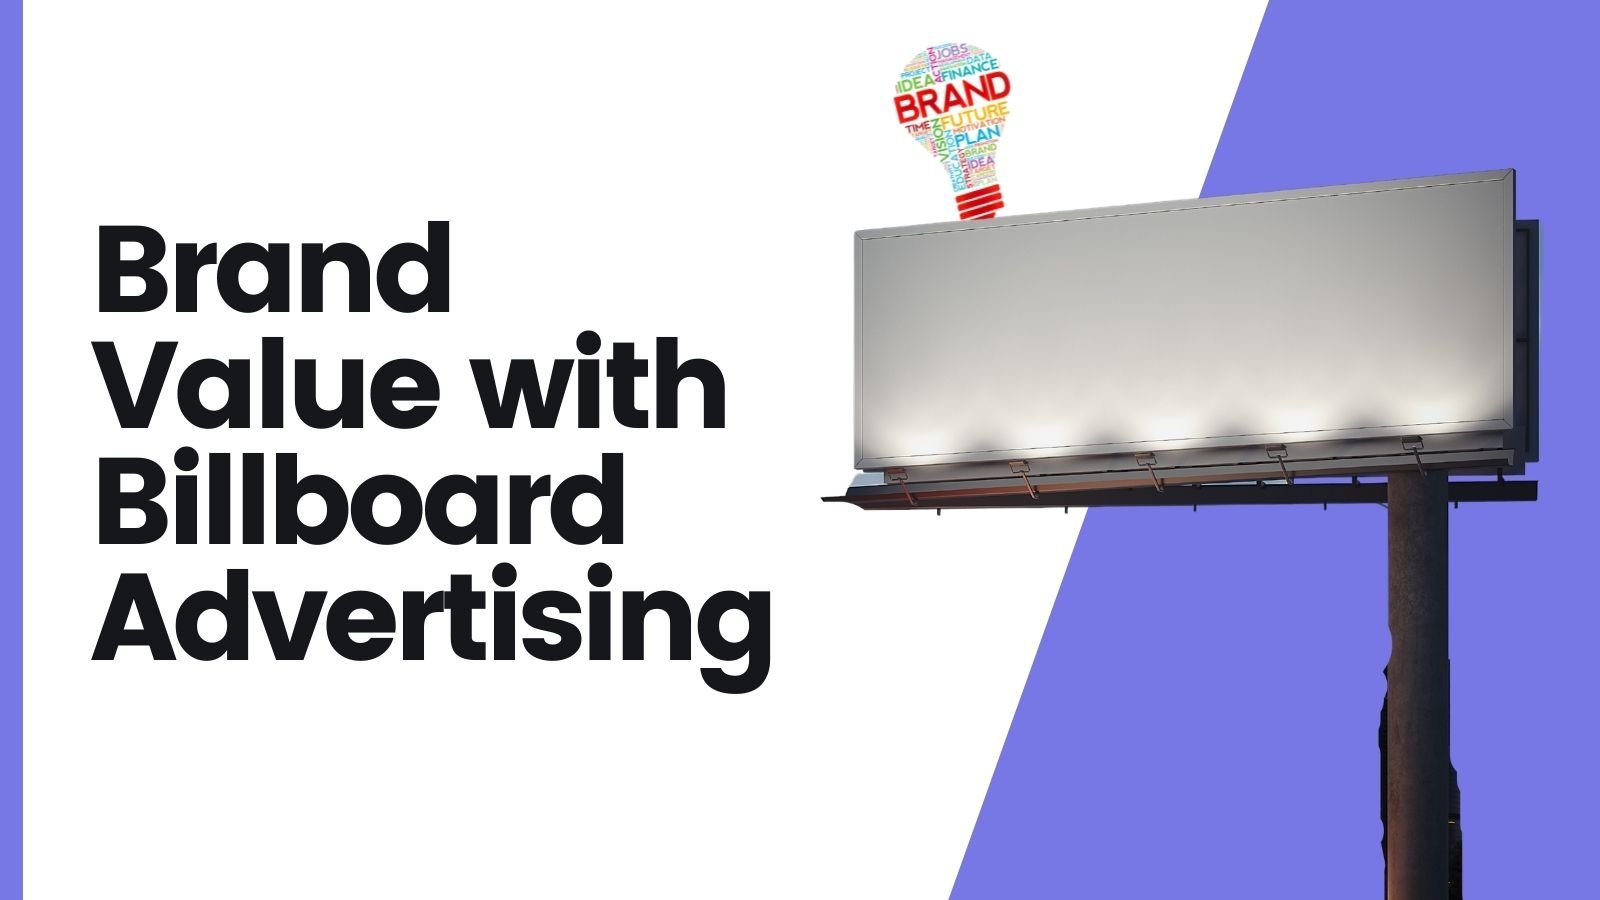 Brand Value with Billboard Advertising